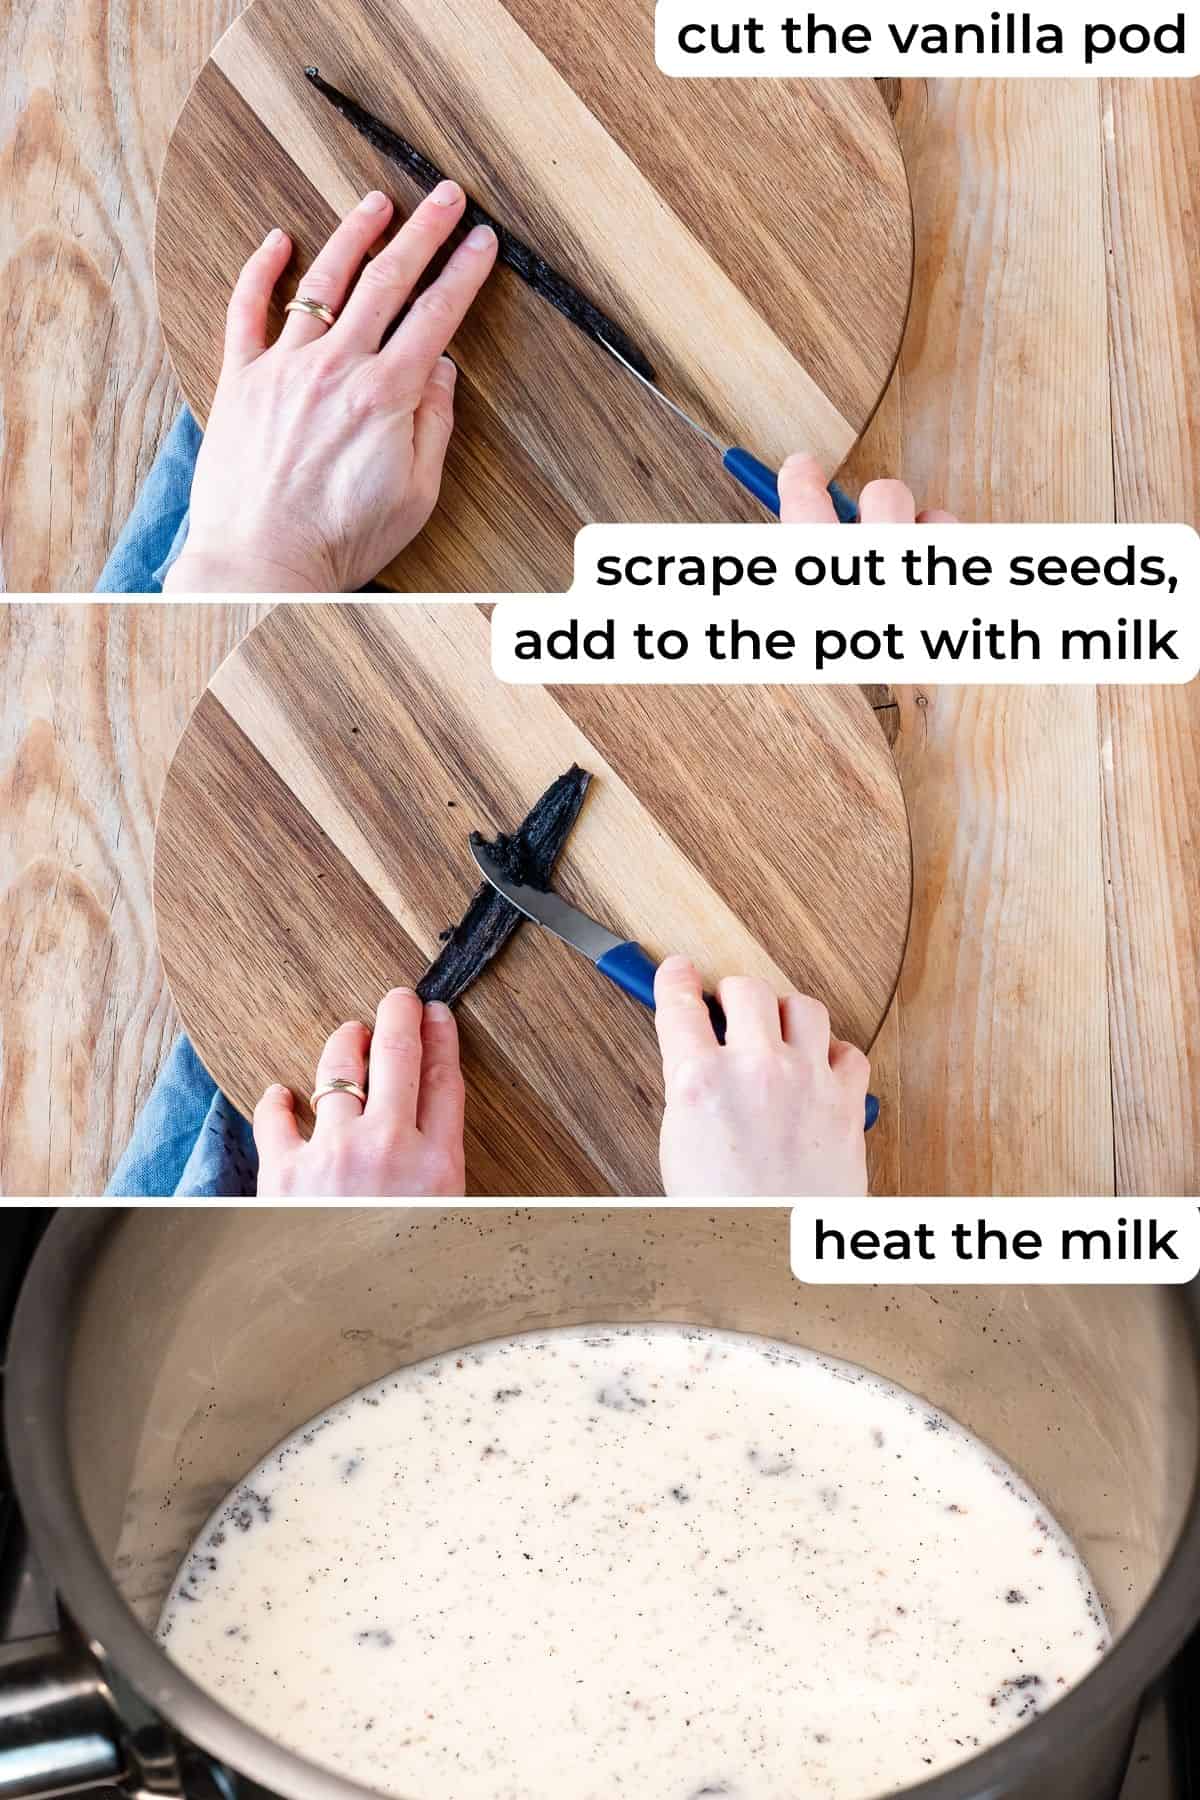 Opening vanilla pod and adding it to the pot with milk.